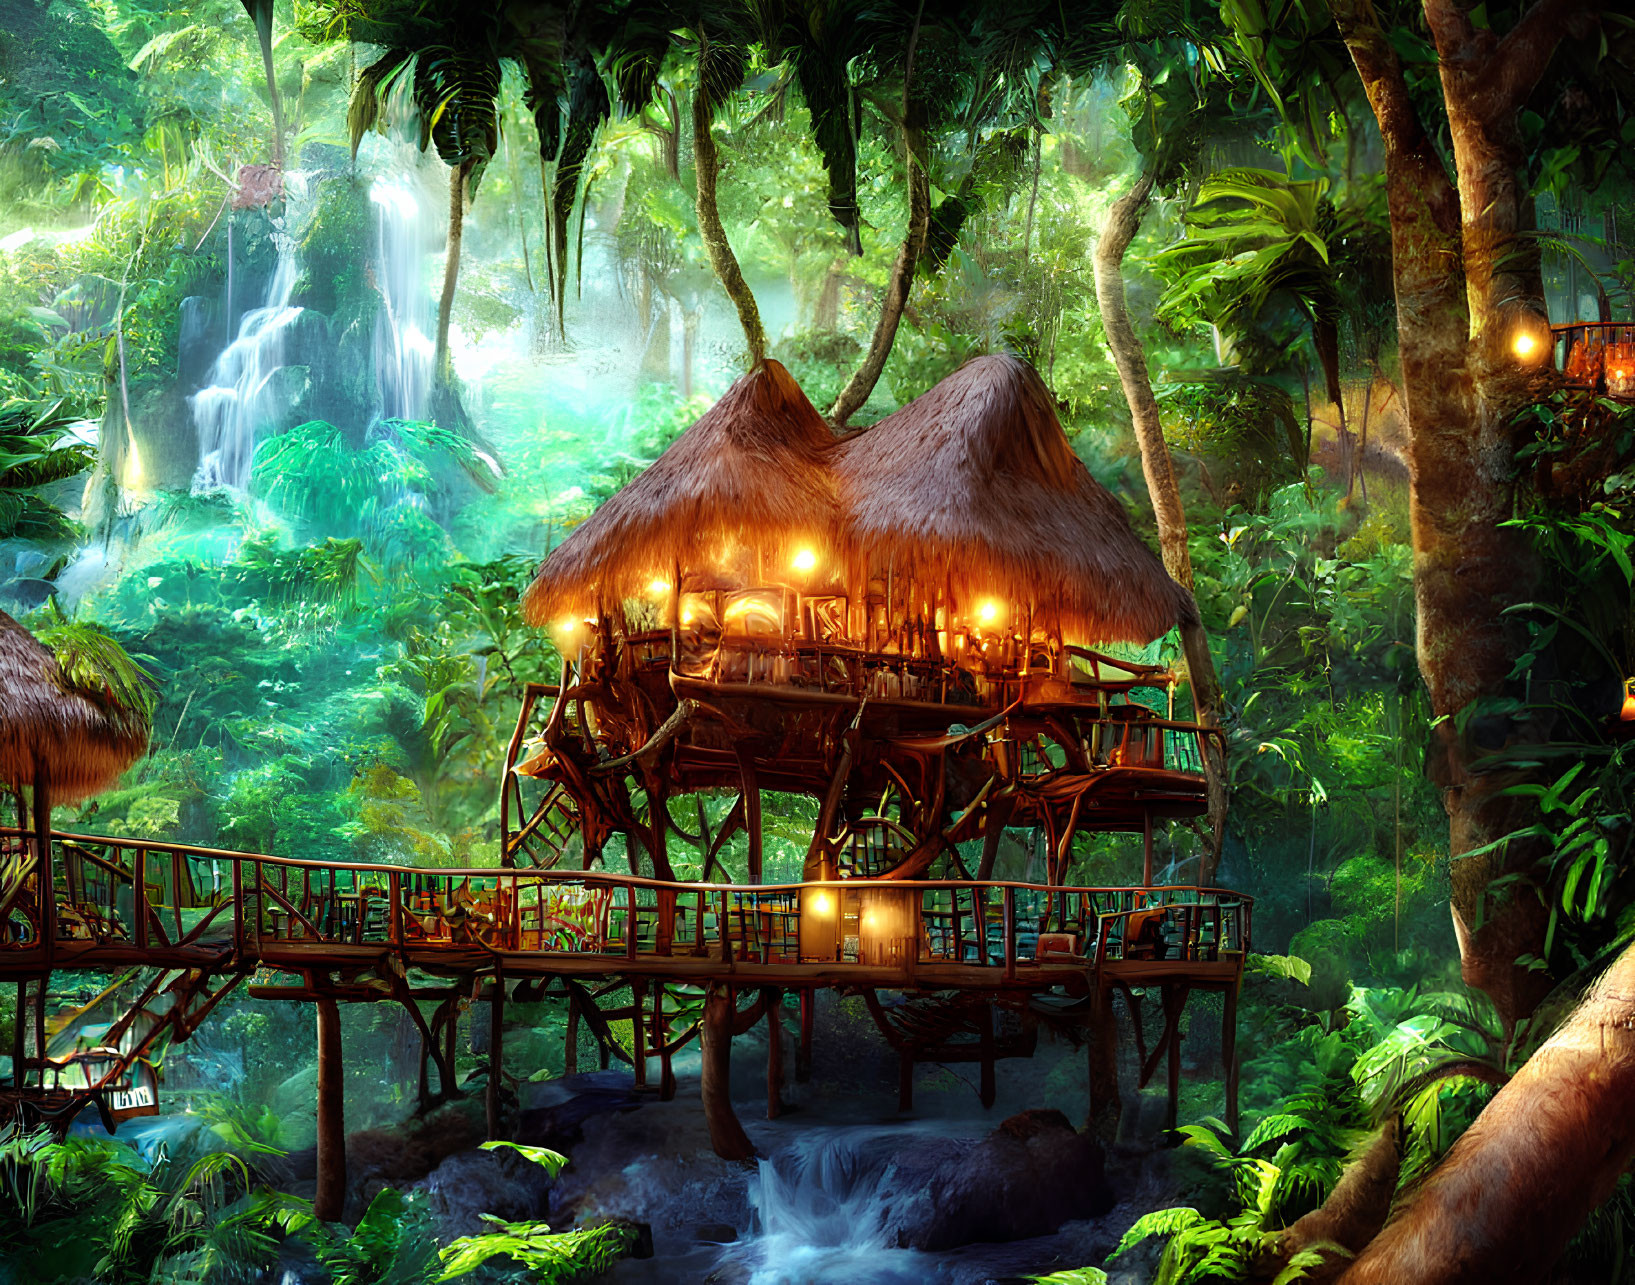 Thatched treehouse with lanterns in lush jungle scenery